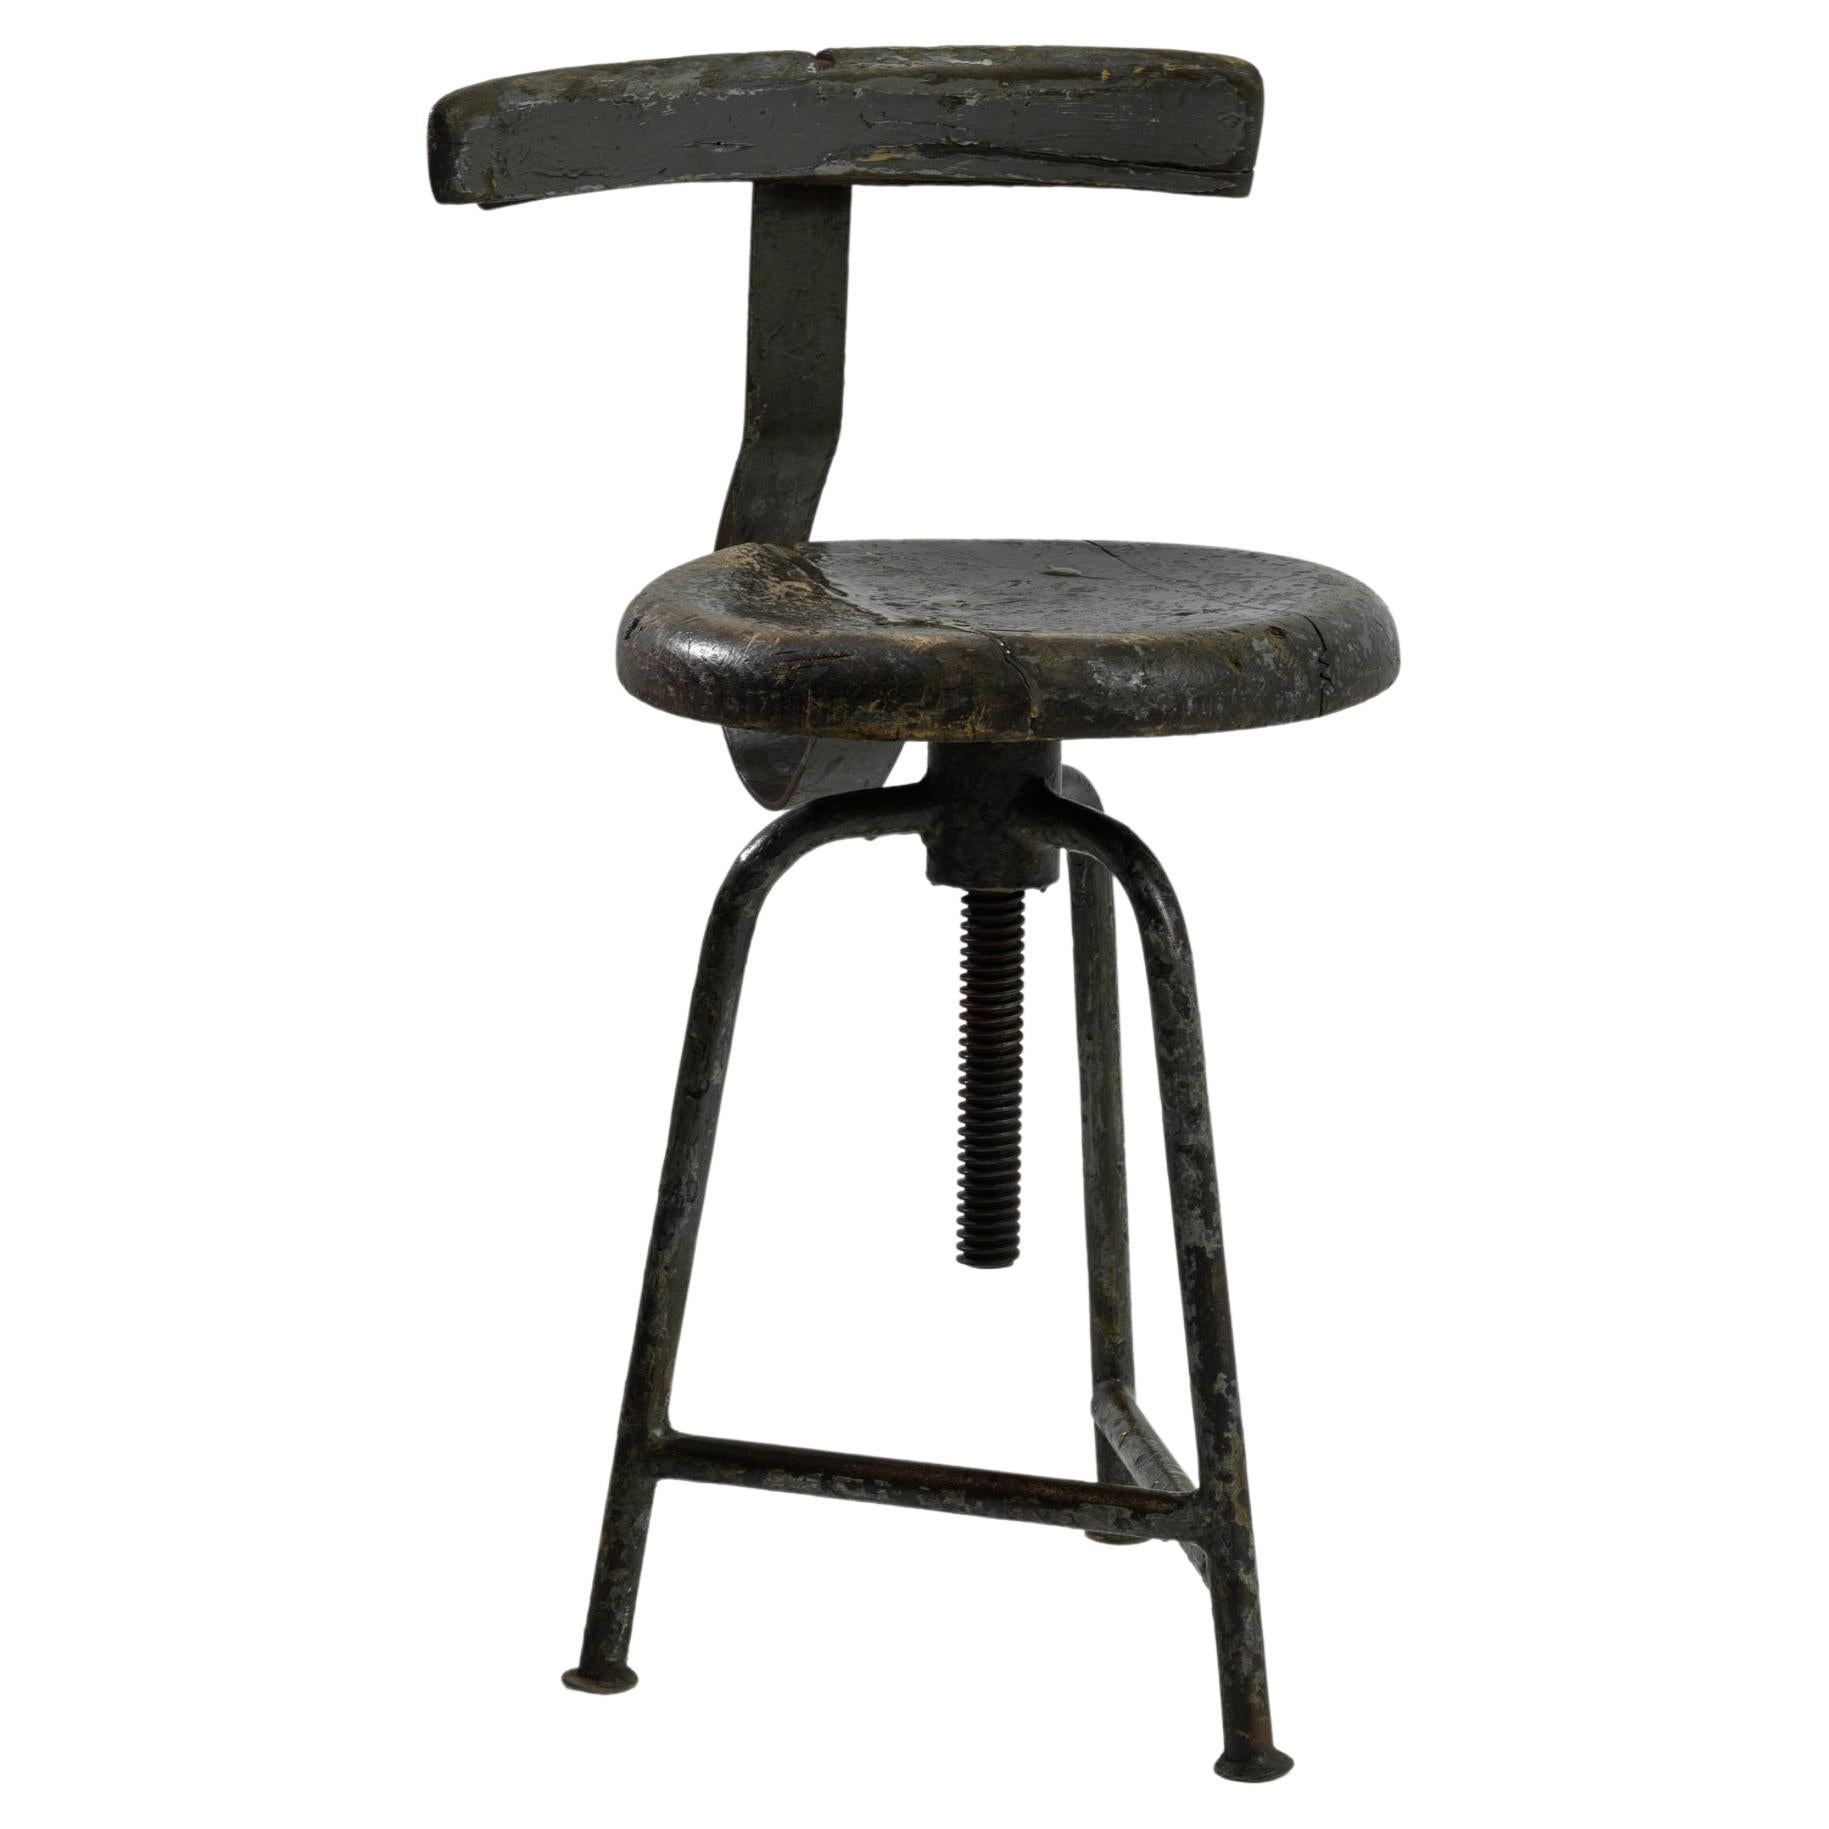 20th Century Industrial Metal Chair with Wooden Seat